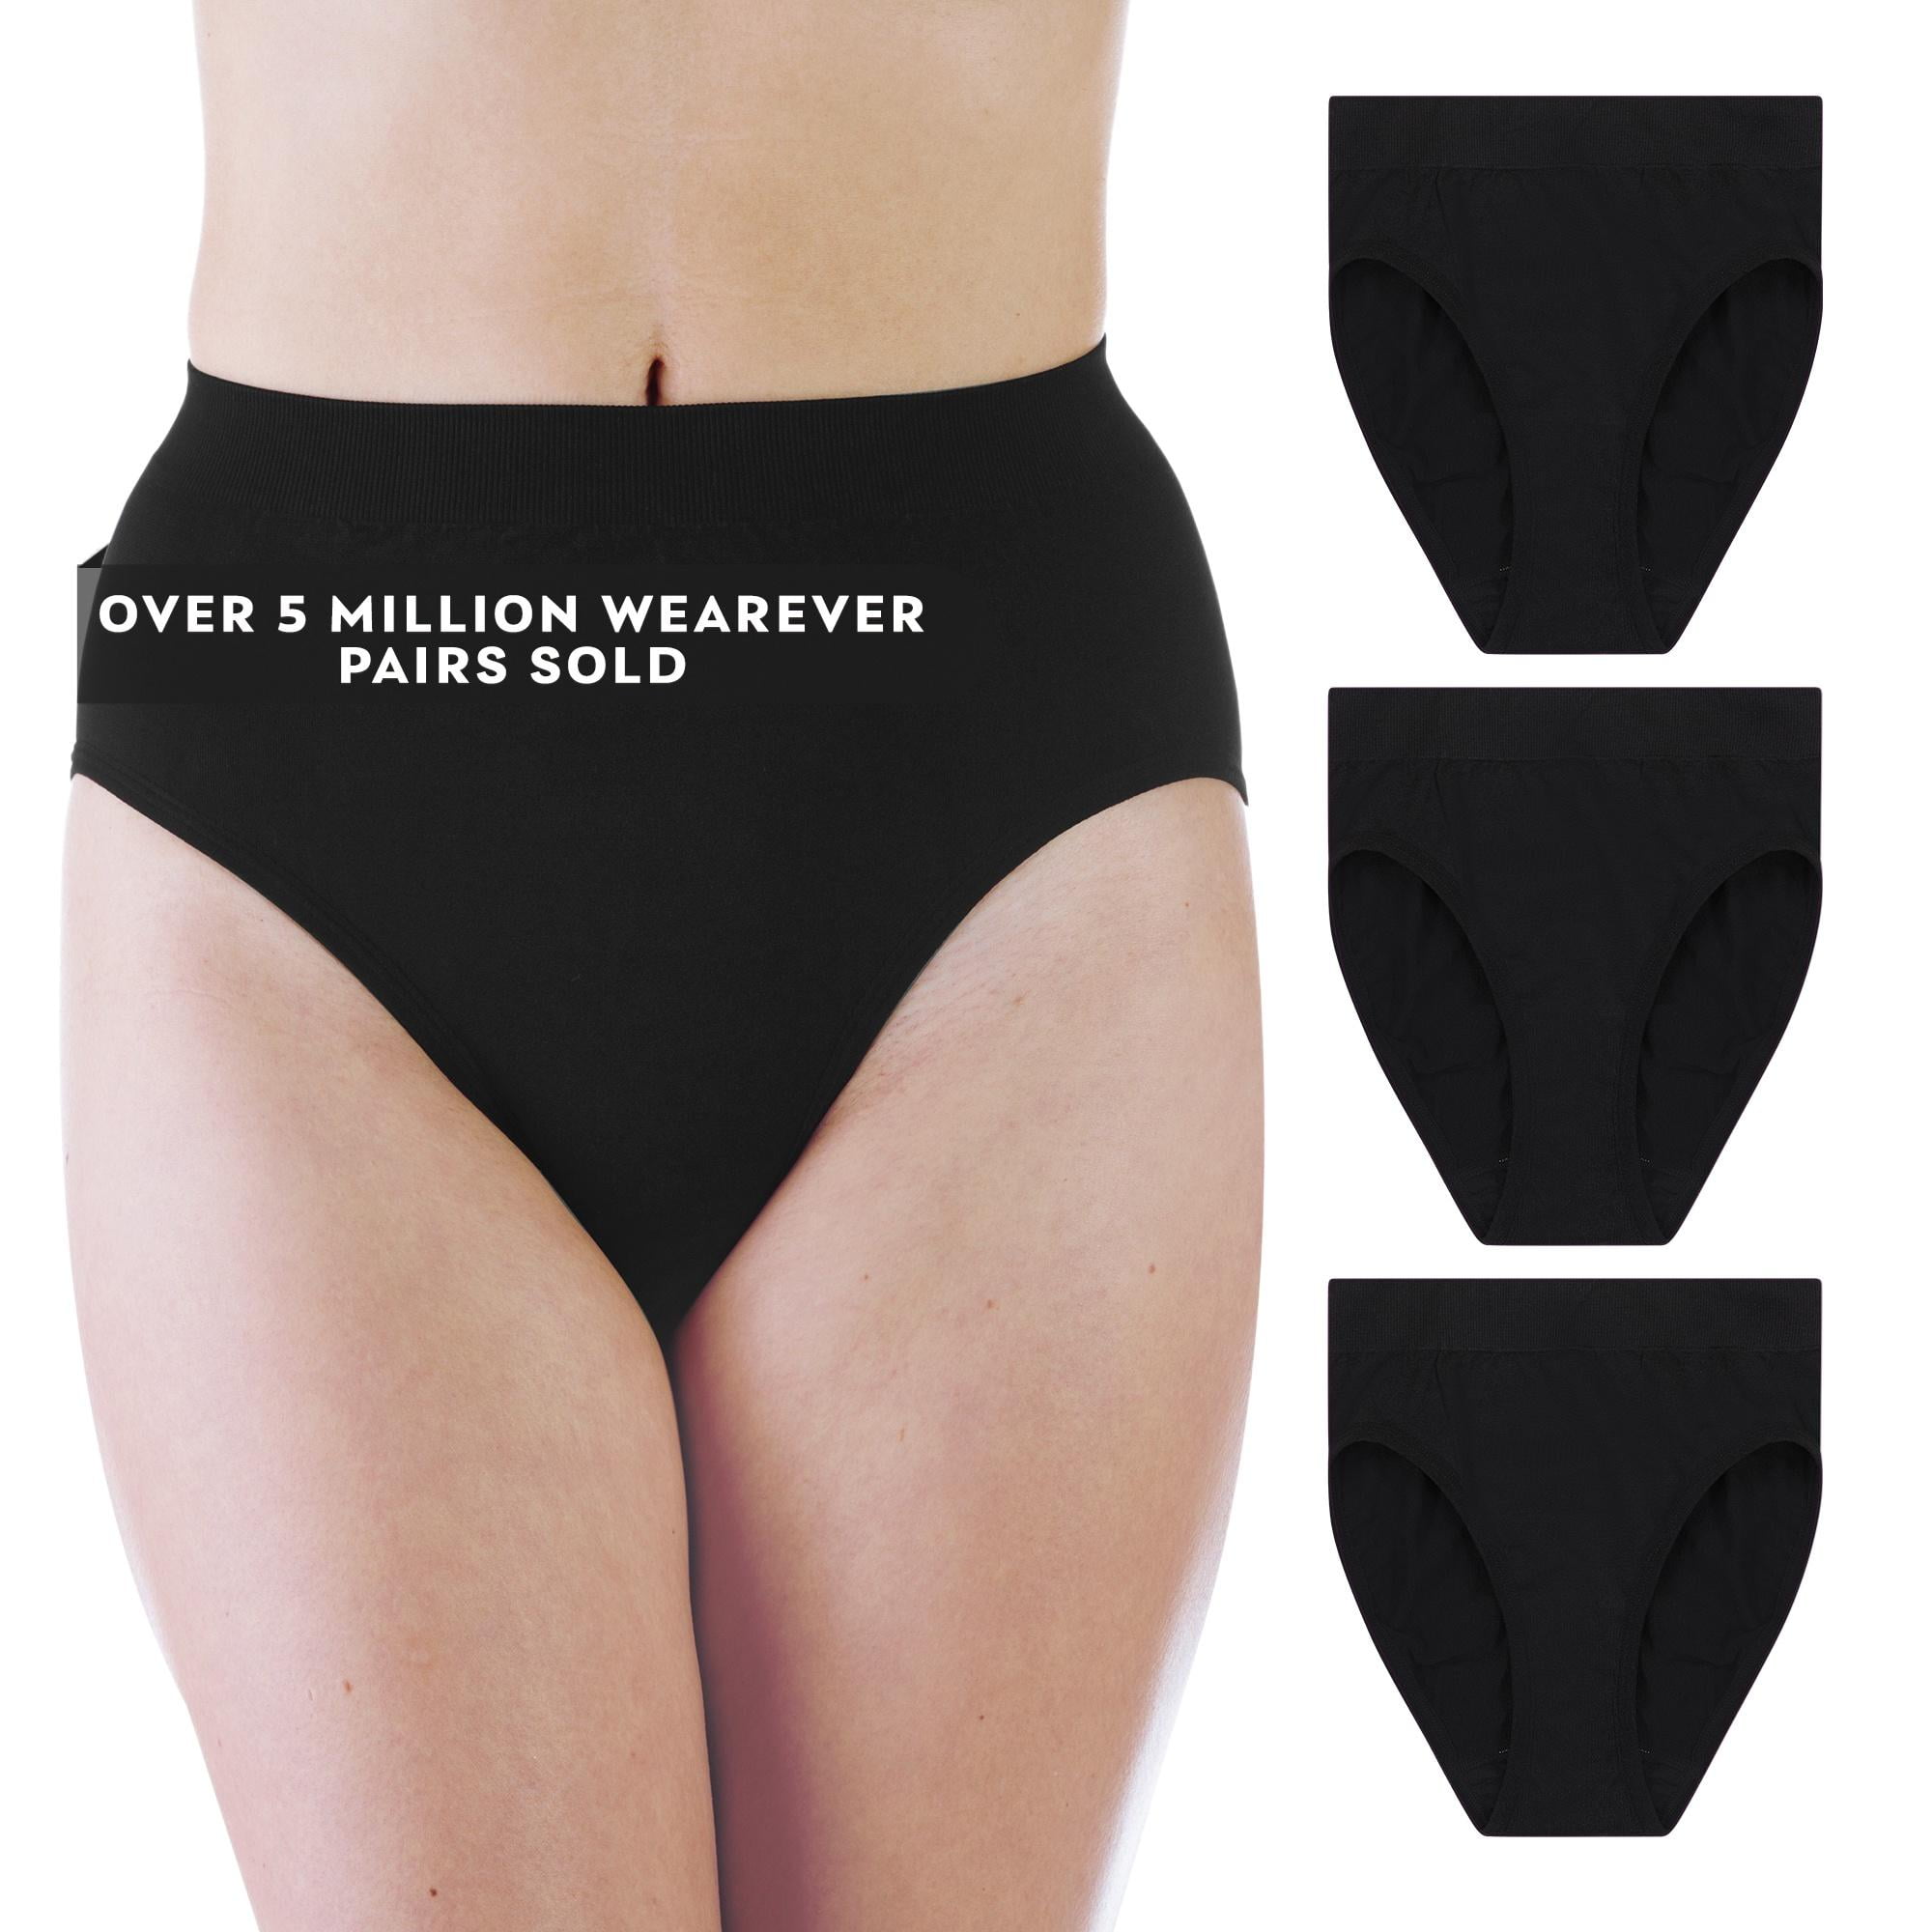 Buy Wearever Women's Lovely Lace Trim Incontinence Panties Black online at